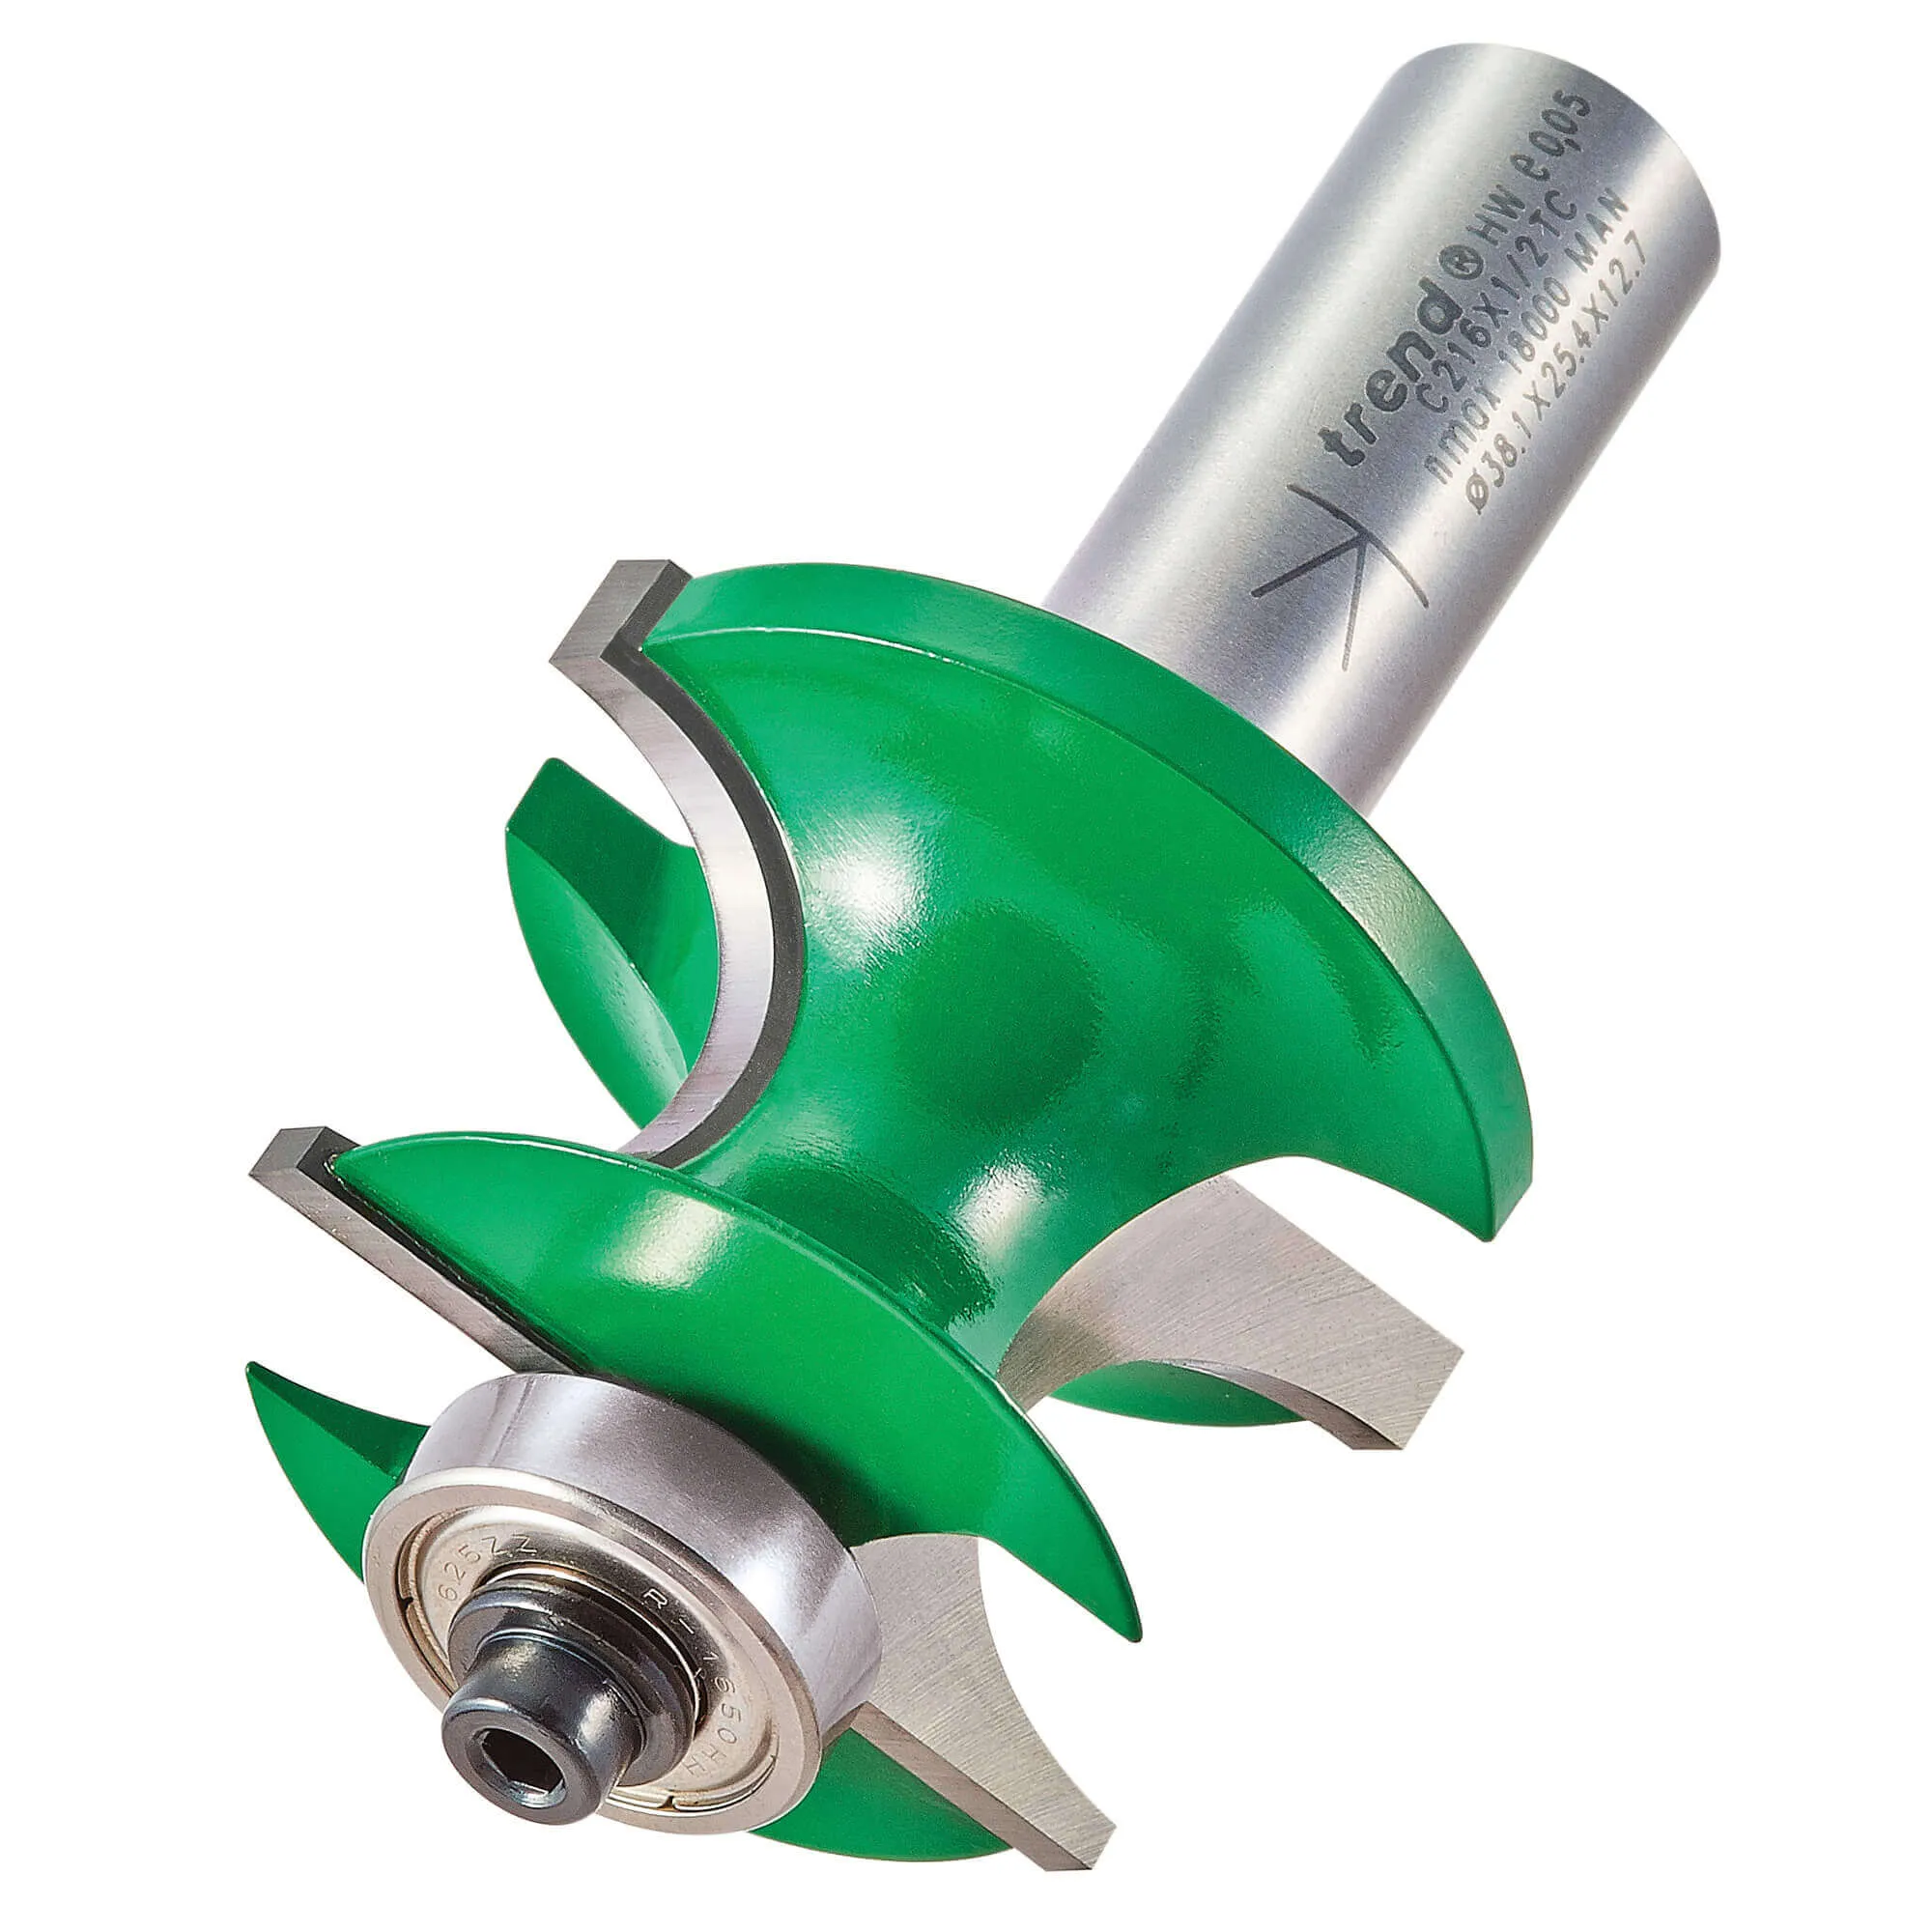 Trend CRAFTPRO Bearing Guided Corner Bead Router Cutter - 38.1mm, 16mm, 1/2"